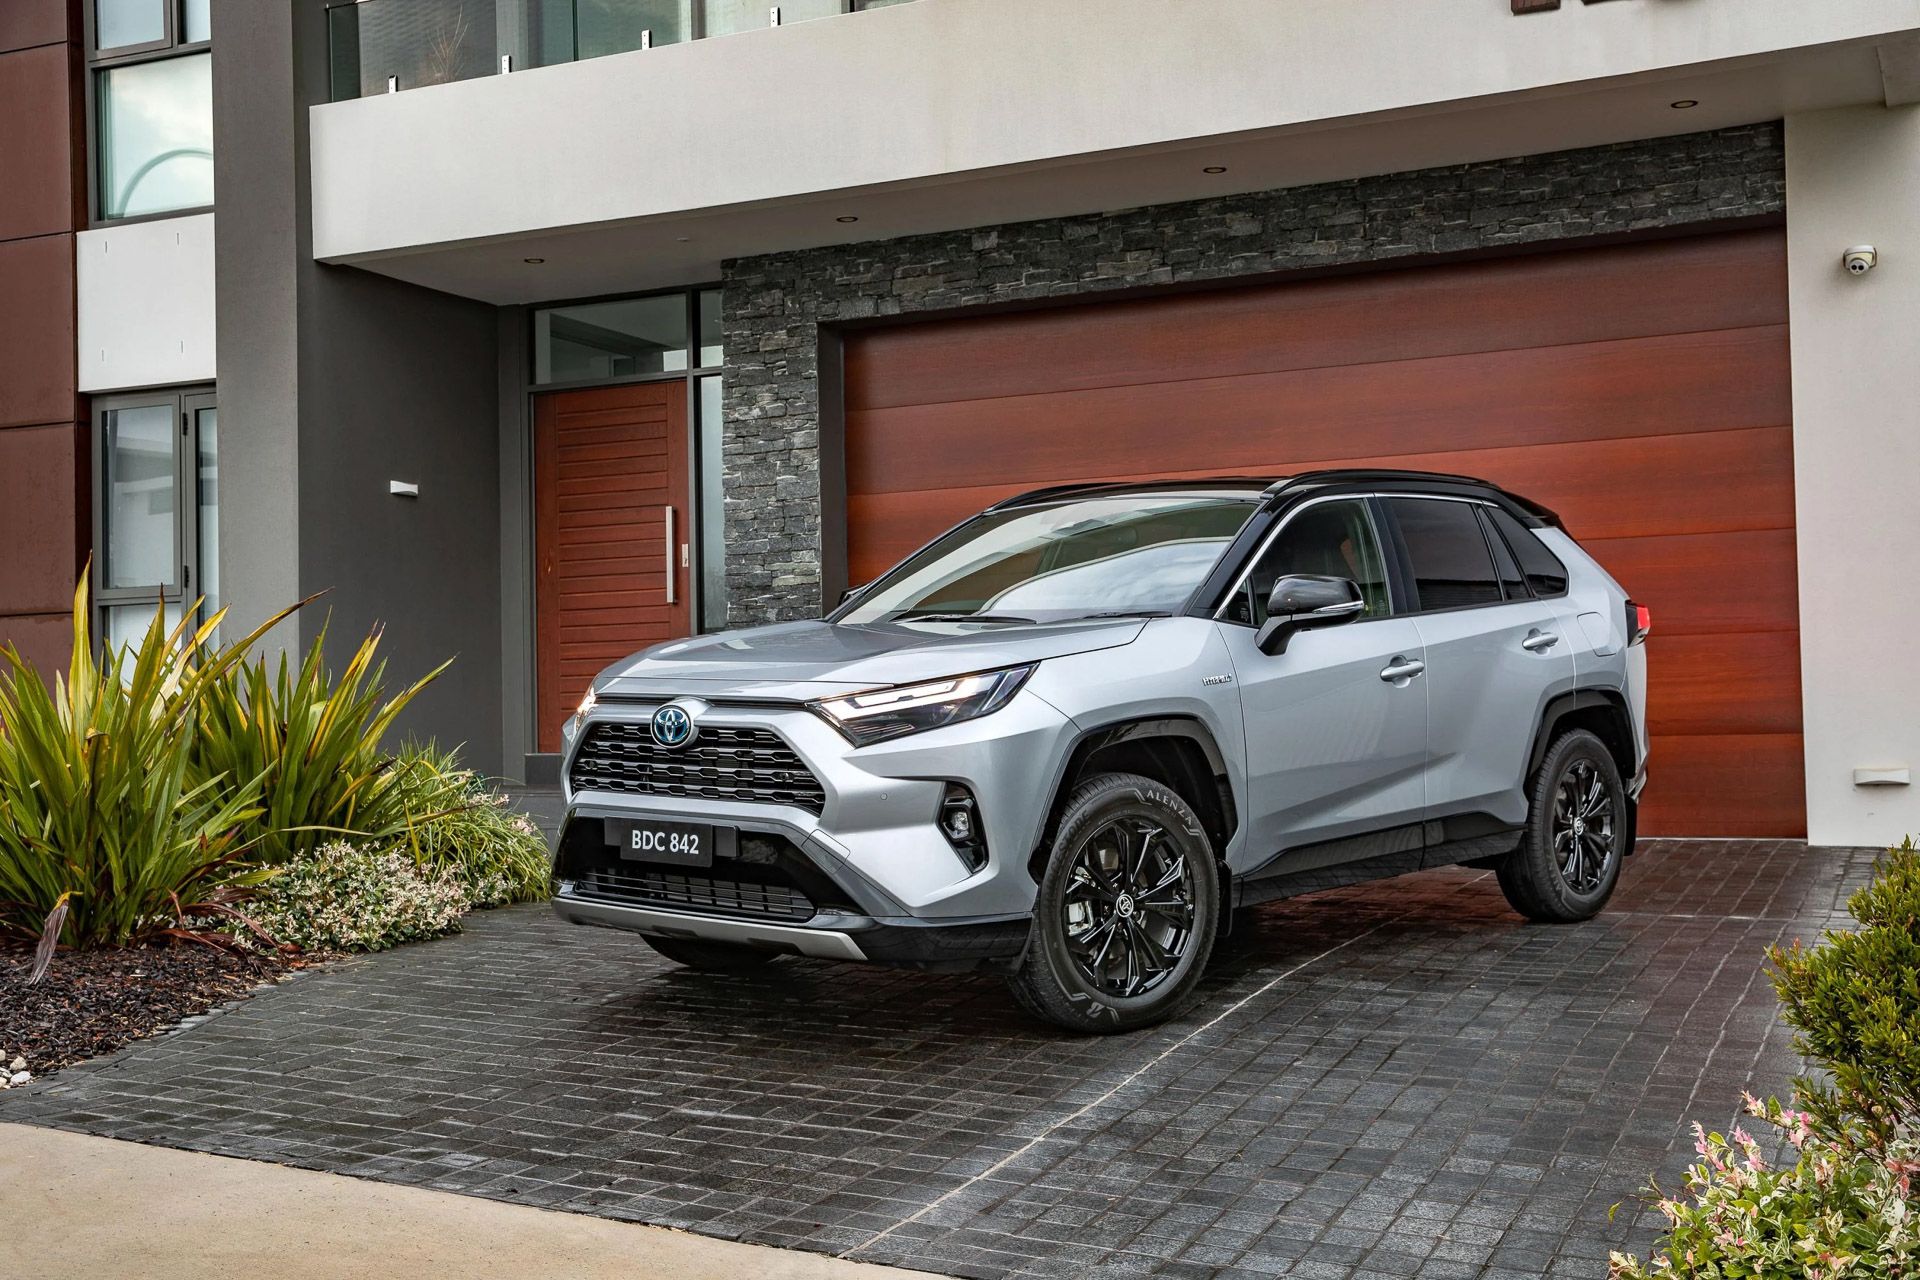 Silver Toyota RAV4 Hybrid parked in front of house driveway